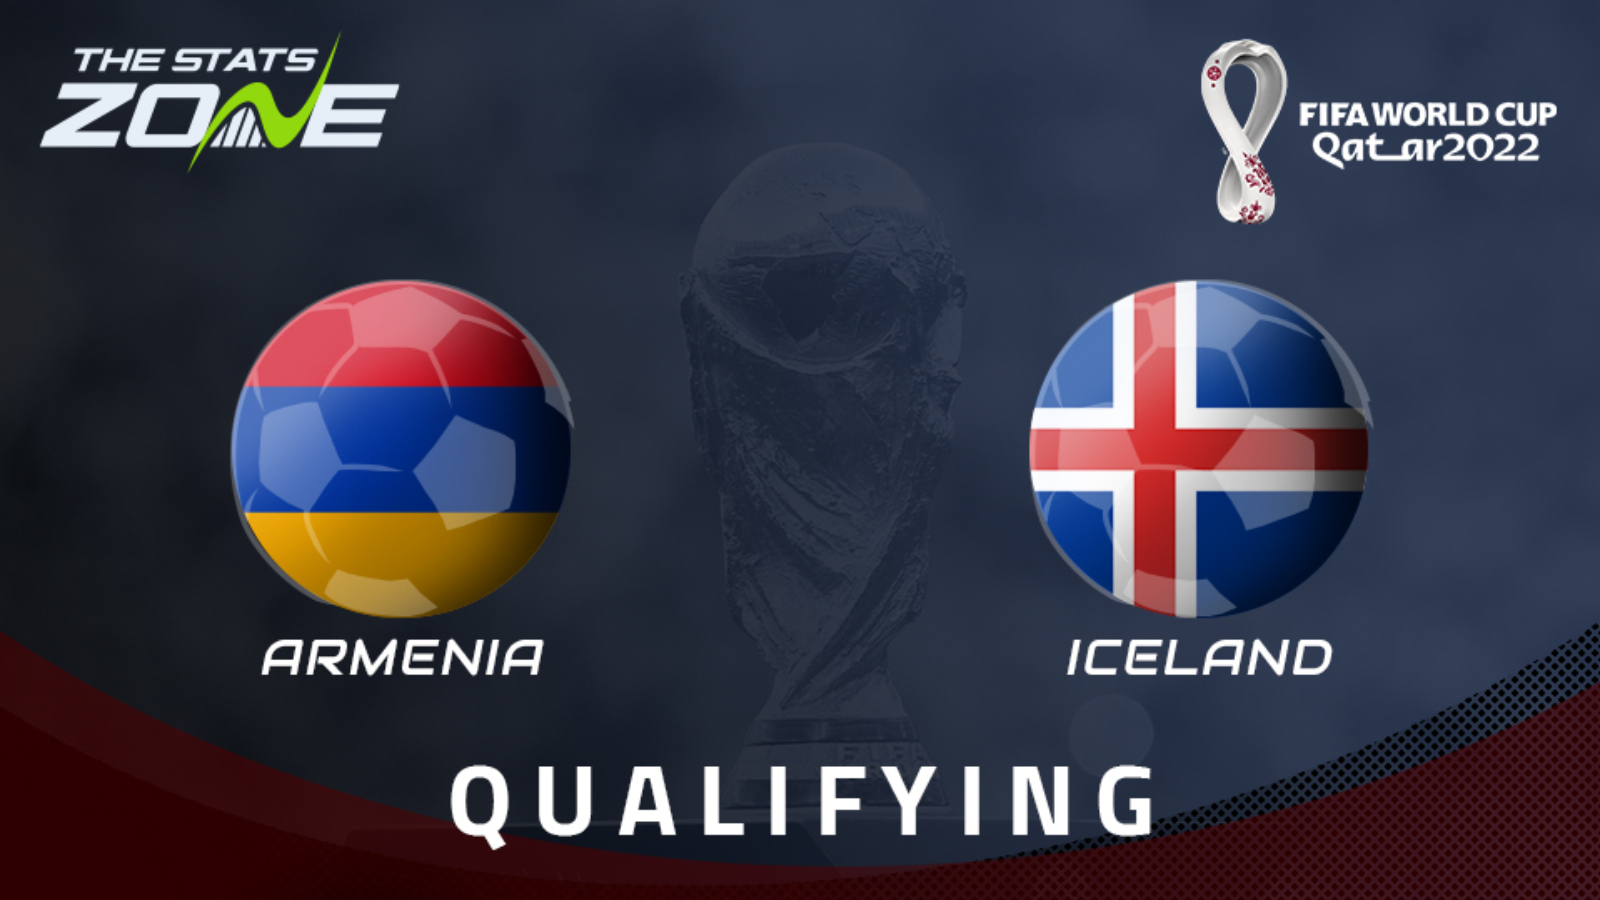 Fifa World Cup 22 European Qualifiers Armenia Vs Iceland Preview Prediction The Stats Zone